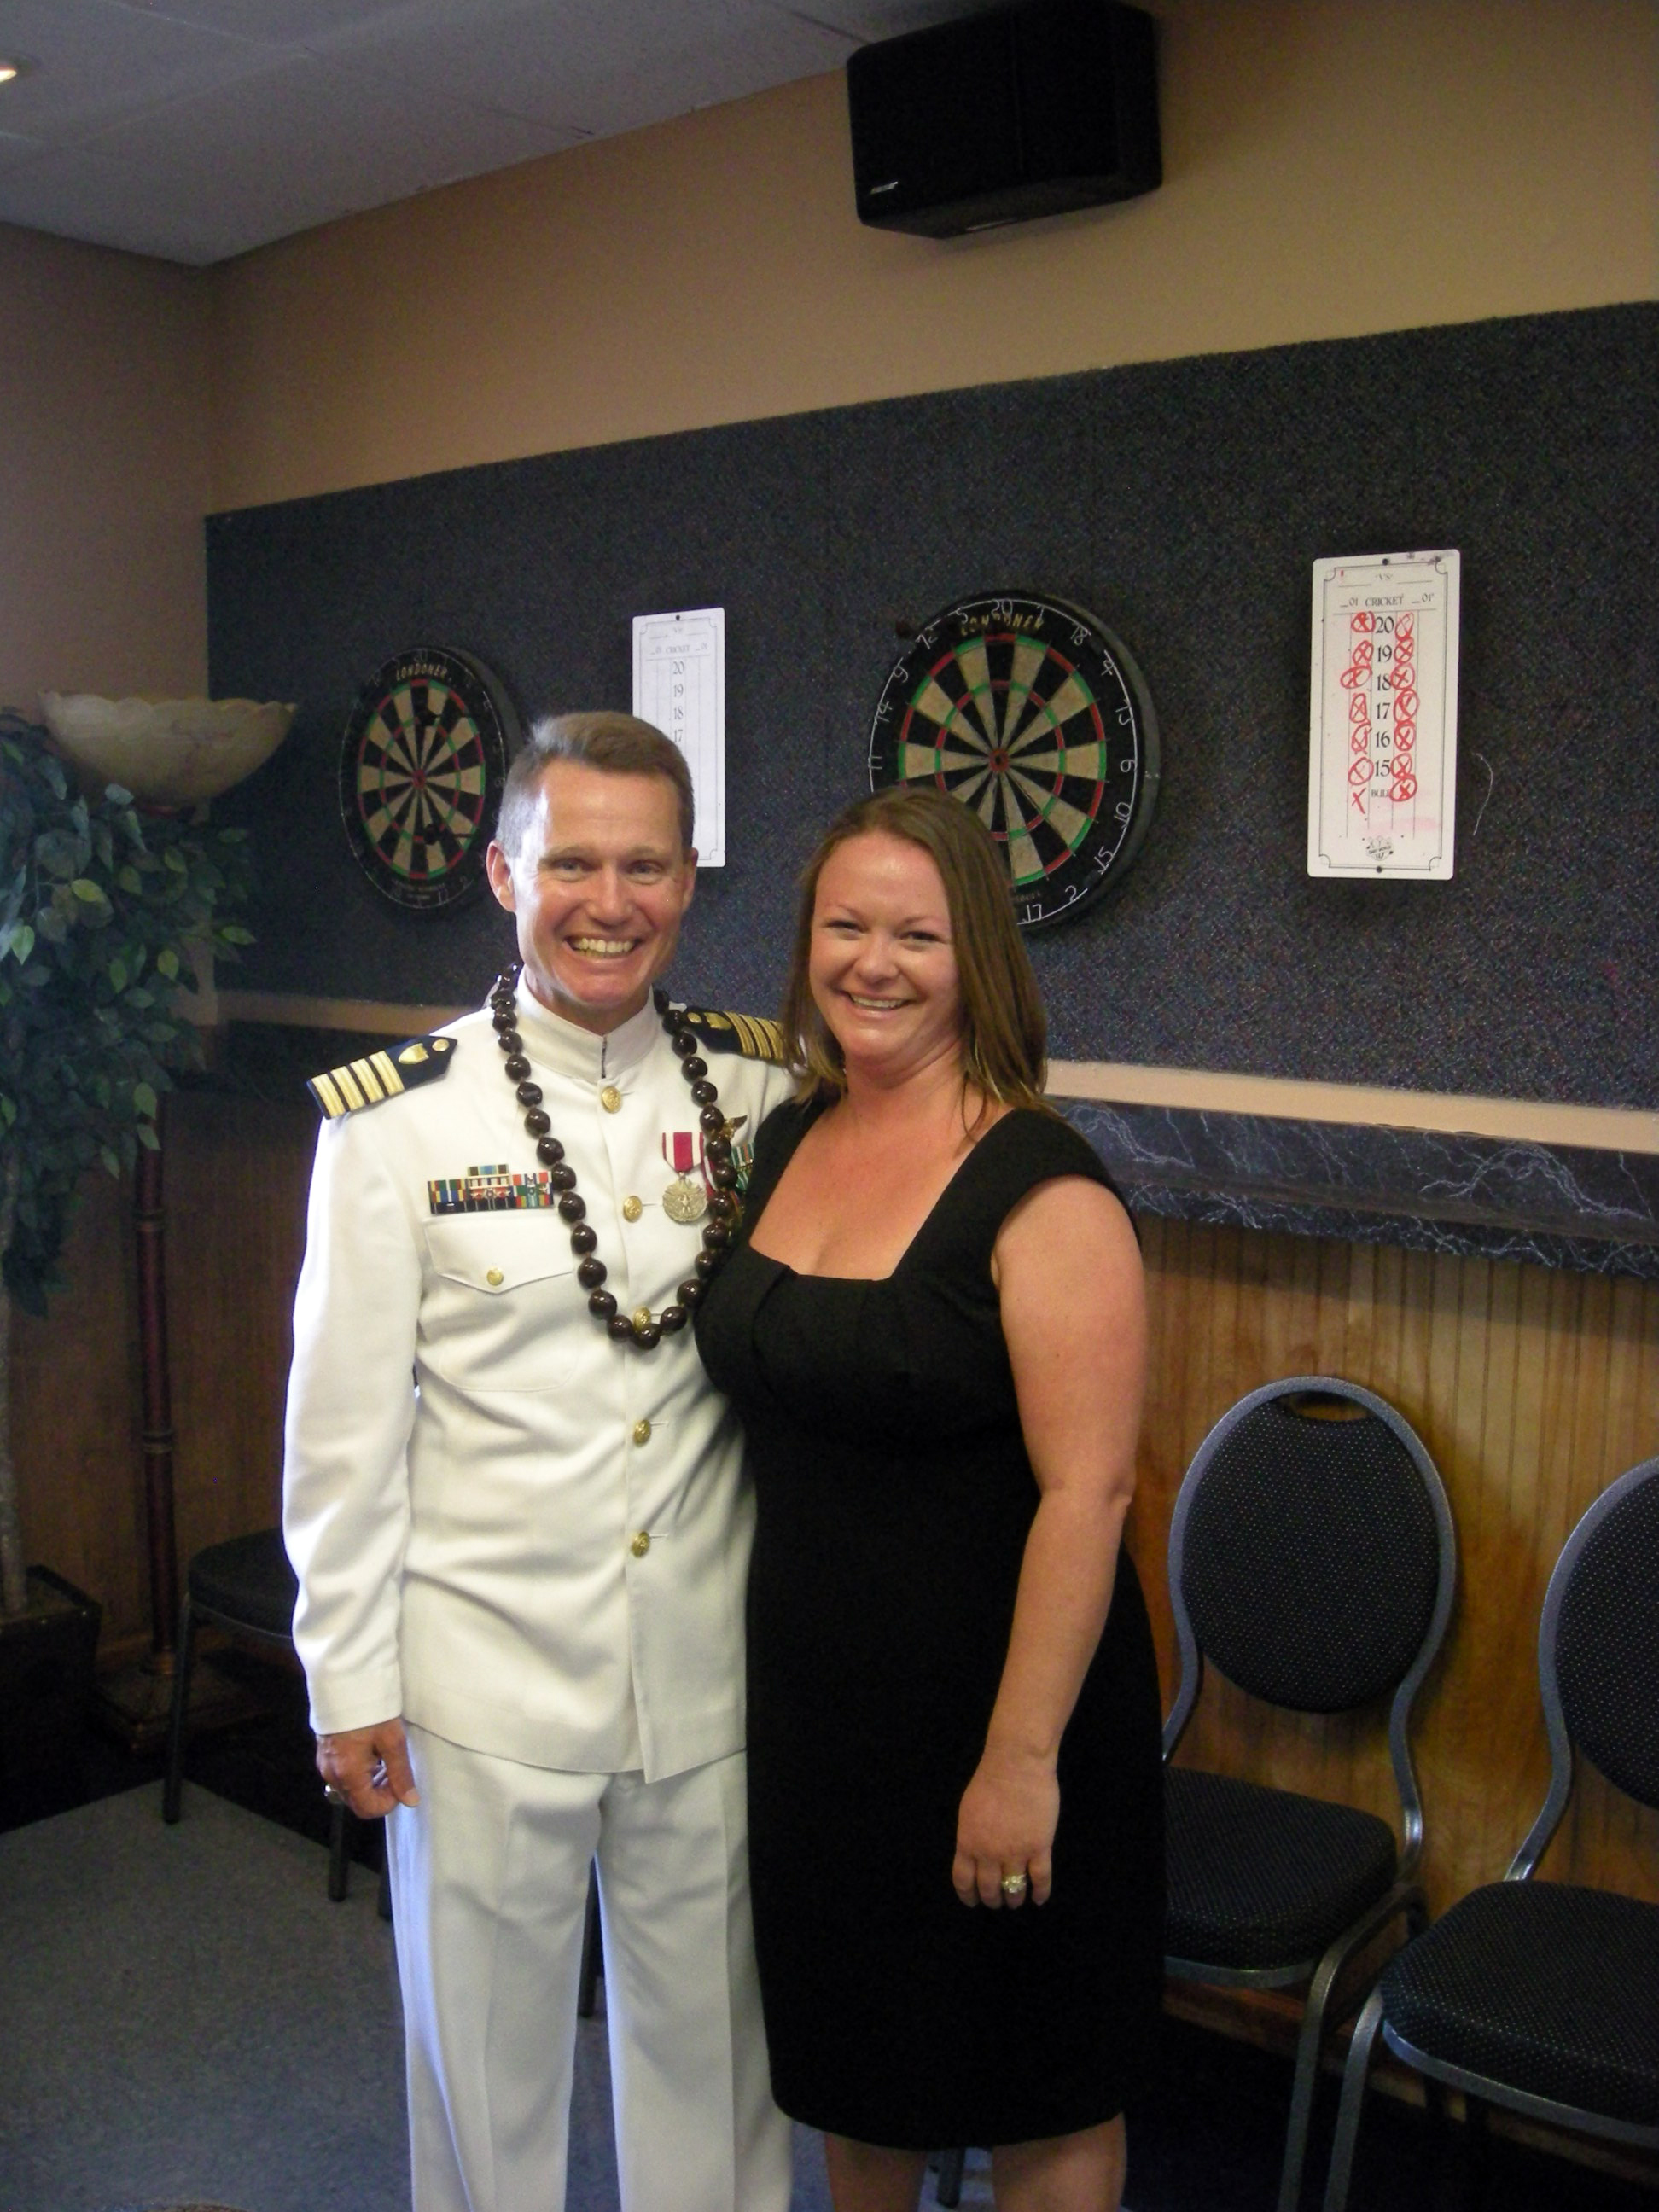  It was such a blessing to meet the girl I hadn't seen since she was barely conscious in the back of my helo 18 years ago. She and her husband Mike -- a Coast Guard Petty Officer and flight mech -- were gracious enough to travel from Florida to provi